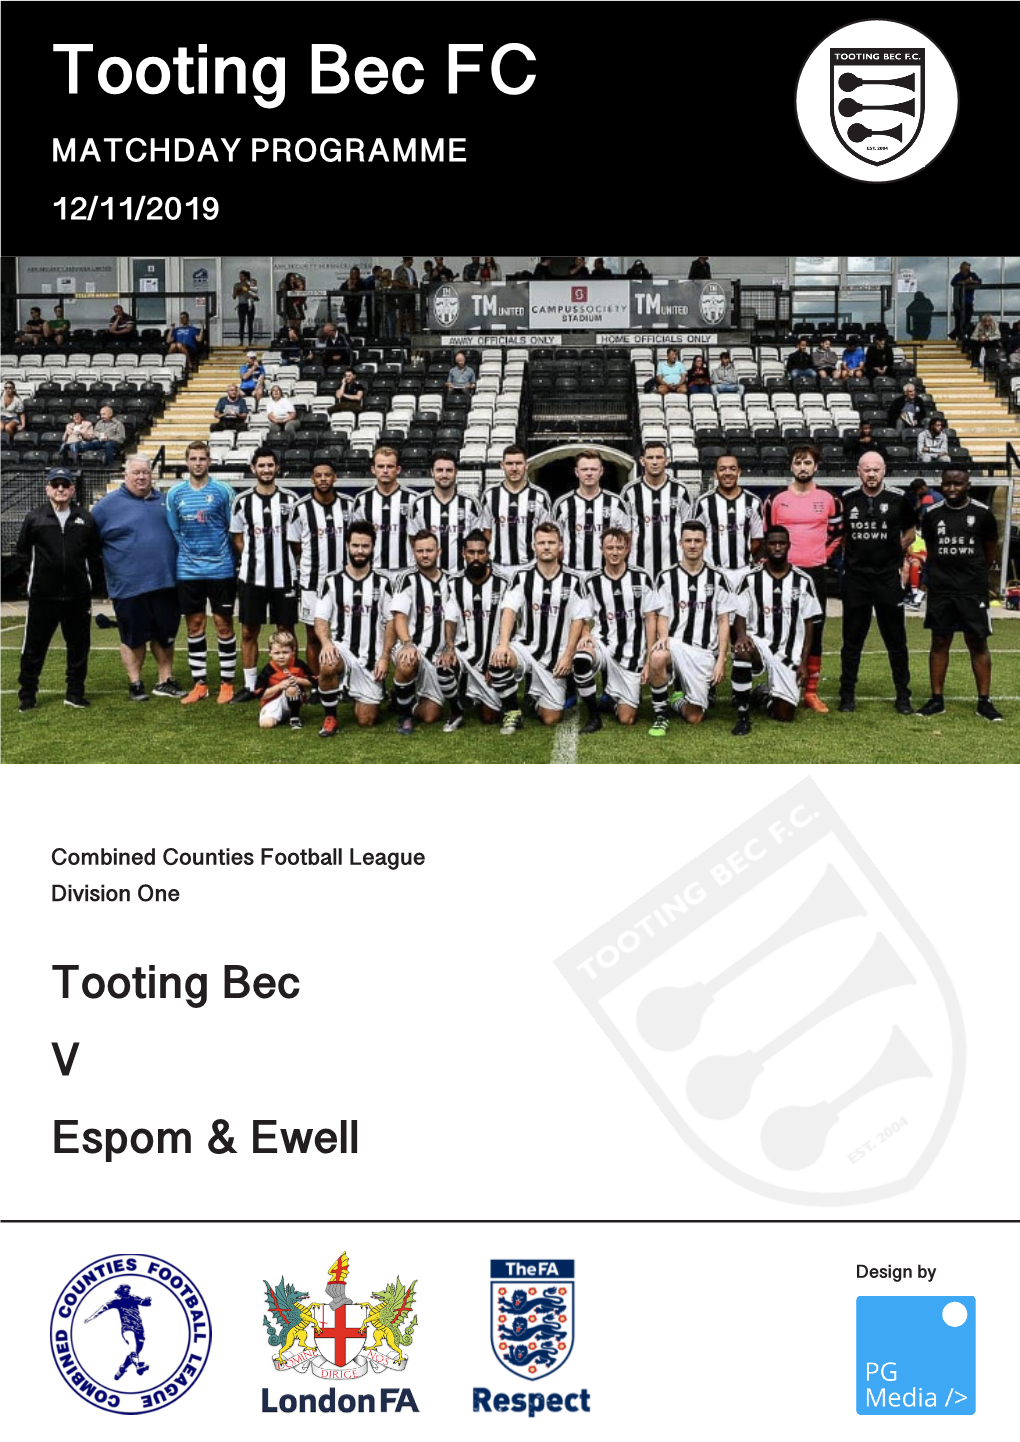 Tooting Bec FC MATCHDAY PROGRAMME 12/11/2019